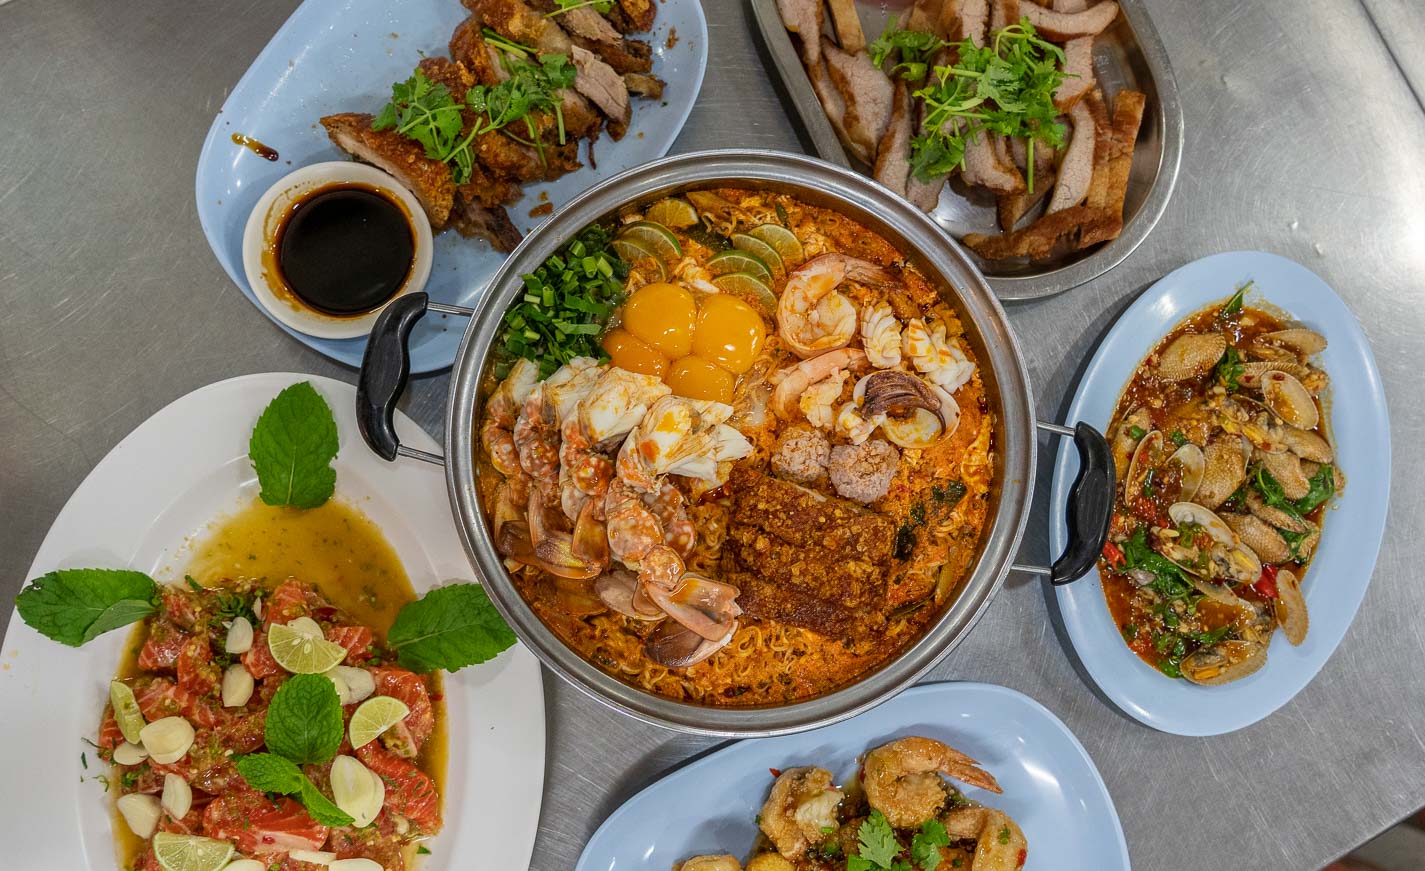 Bangkok Food Guide — 9 Street Food Stalls Most Recommended By Locals